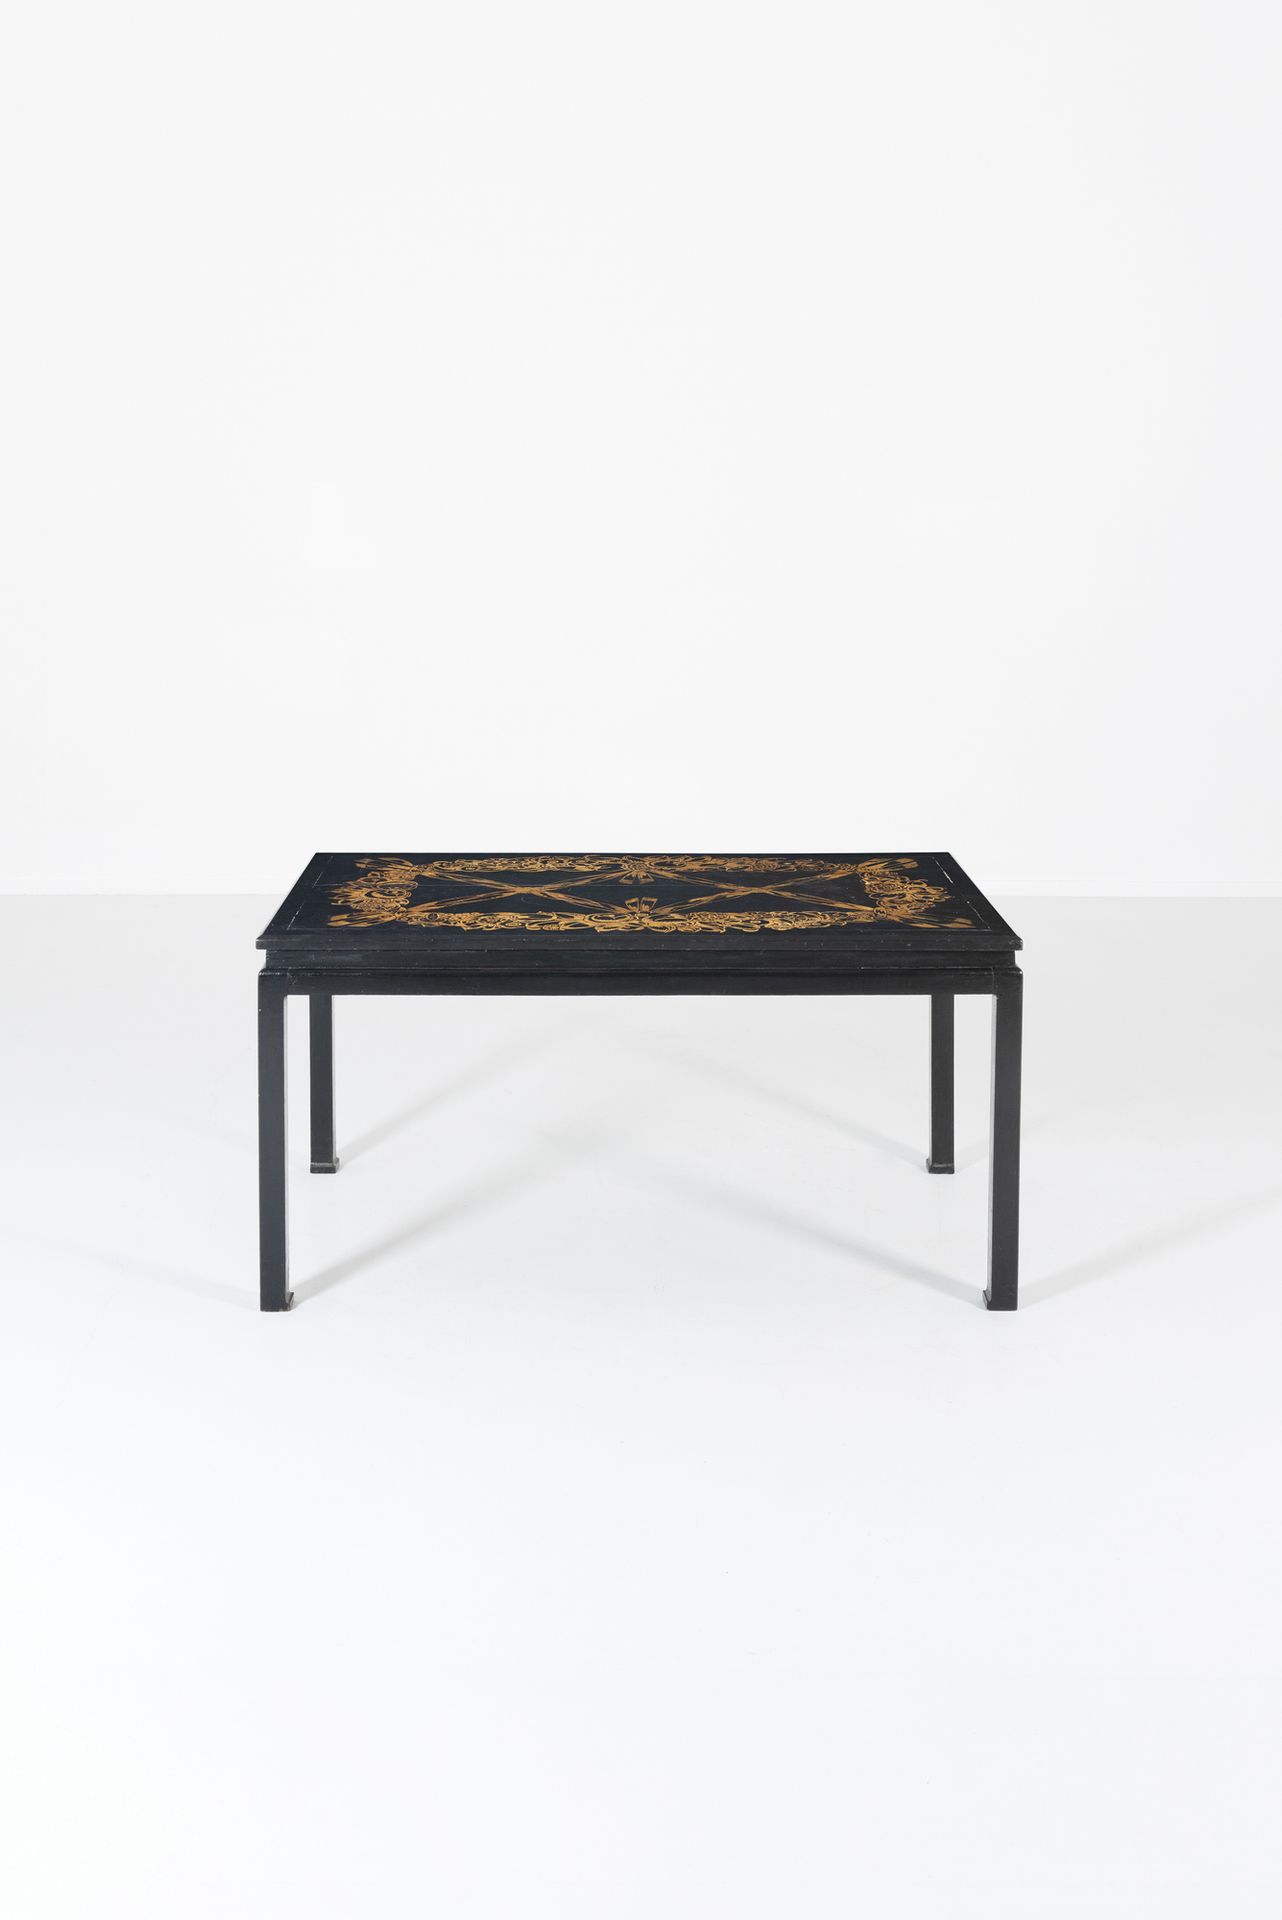 LOUIS SÜE (1875-1968) & ANDRÉ MARE (1885-1932) Table model "Mabraux 

Black and &hellip;